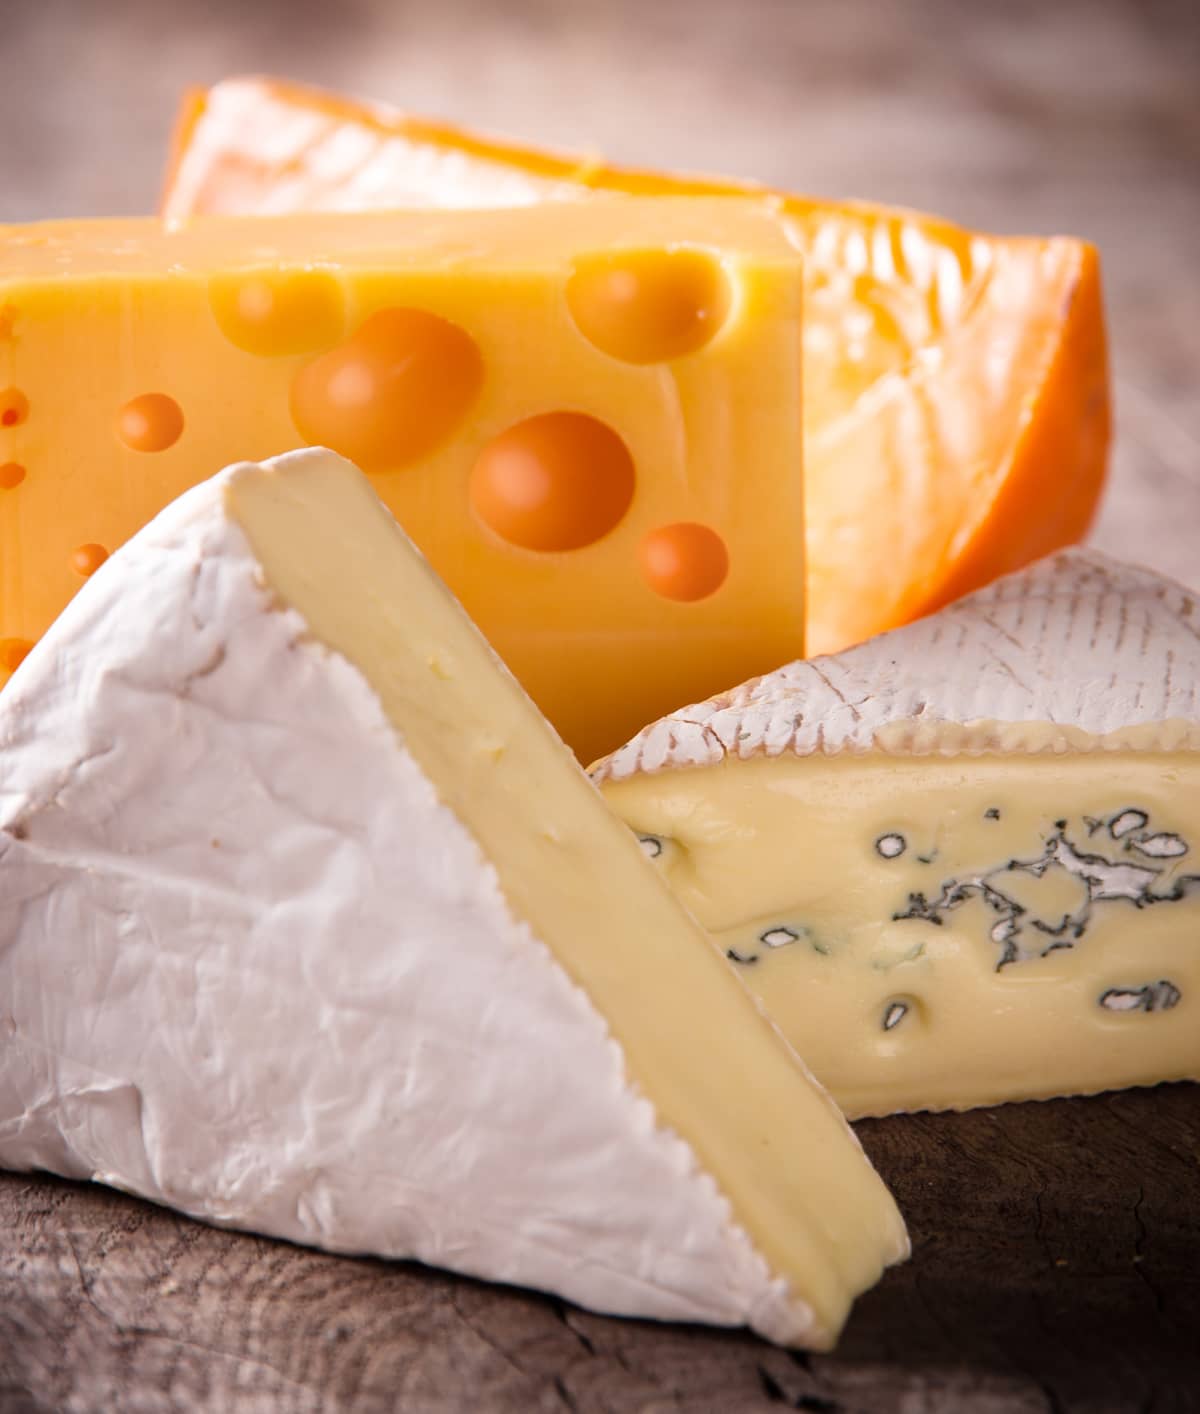 Various types of cheese on a wooden surface